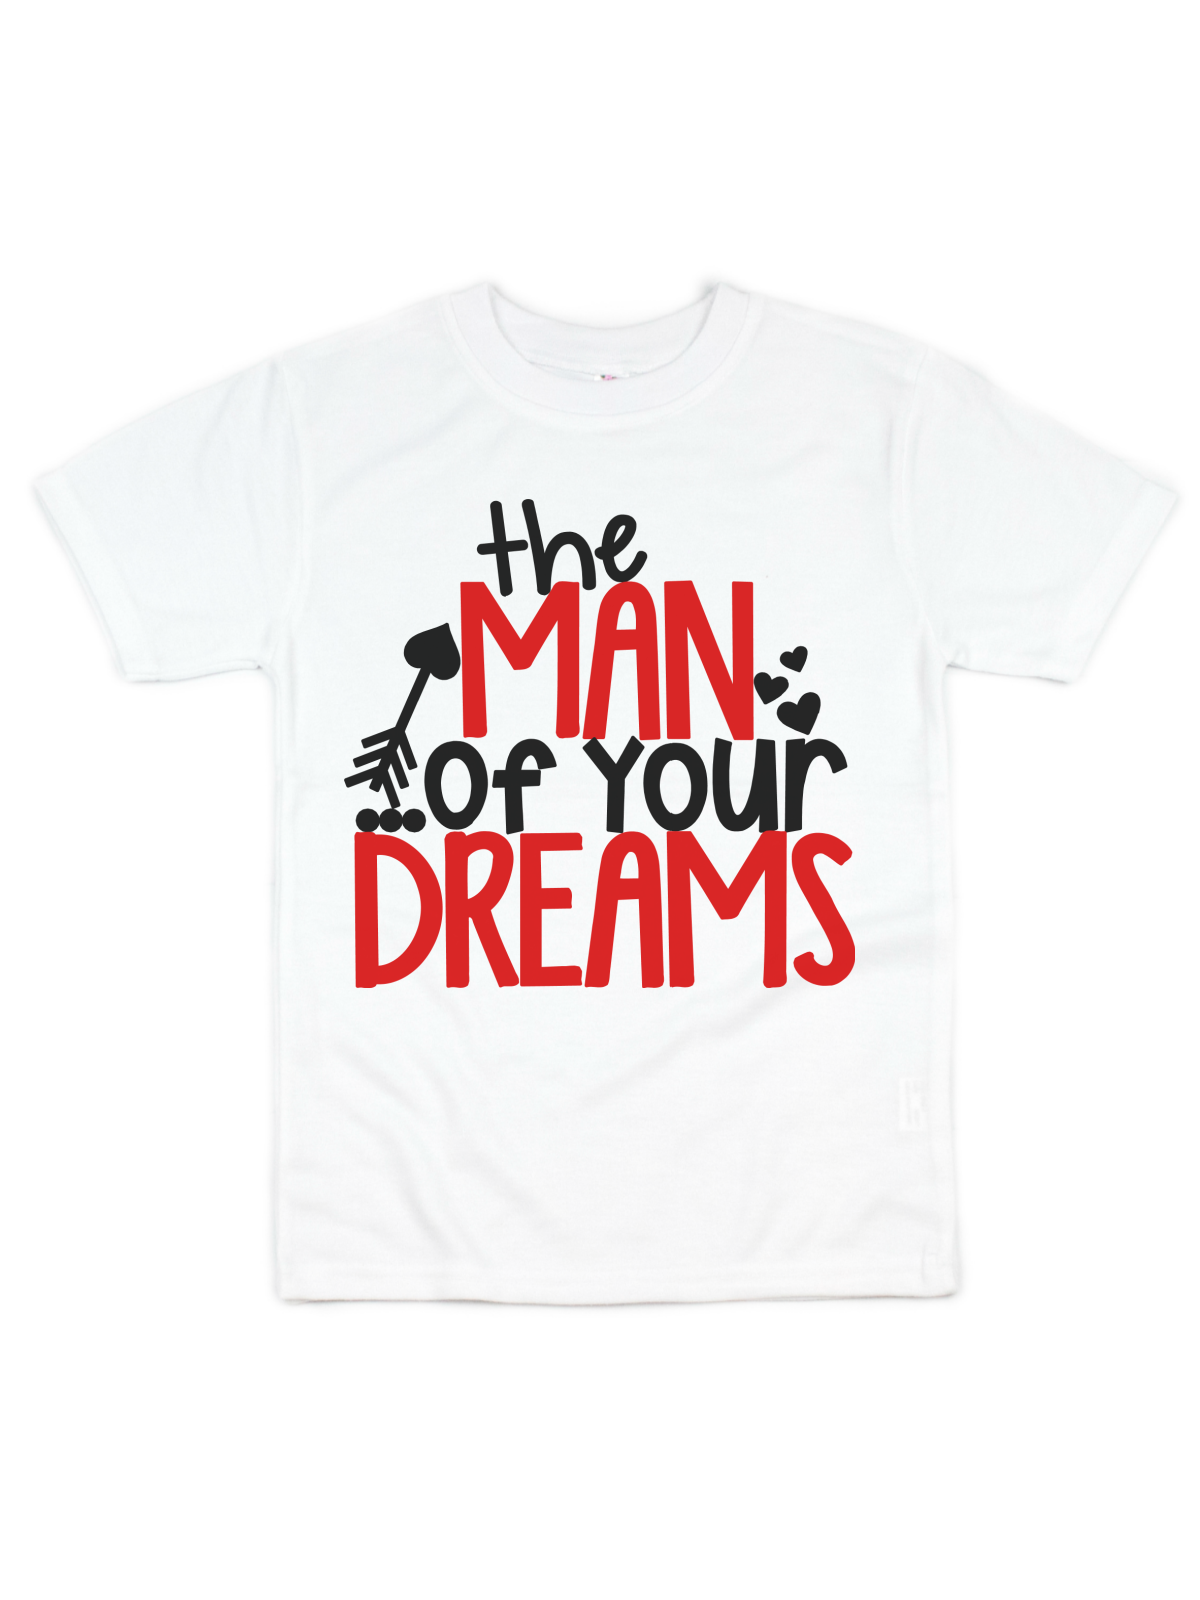 The Man of Your Dreams Boys Valentine's Day Shirt